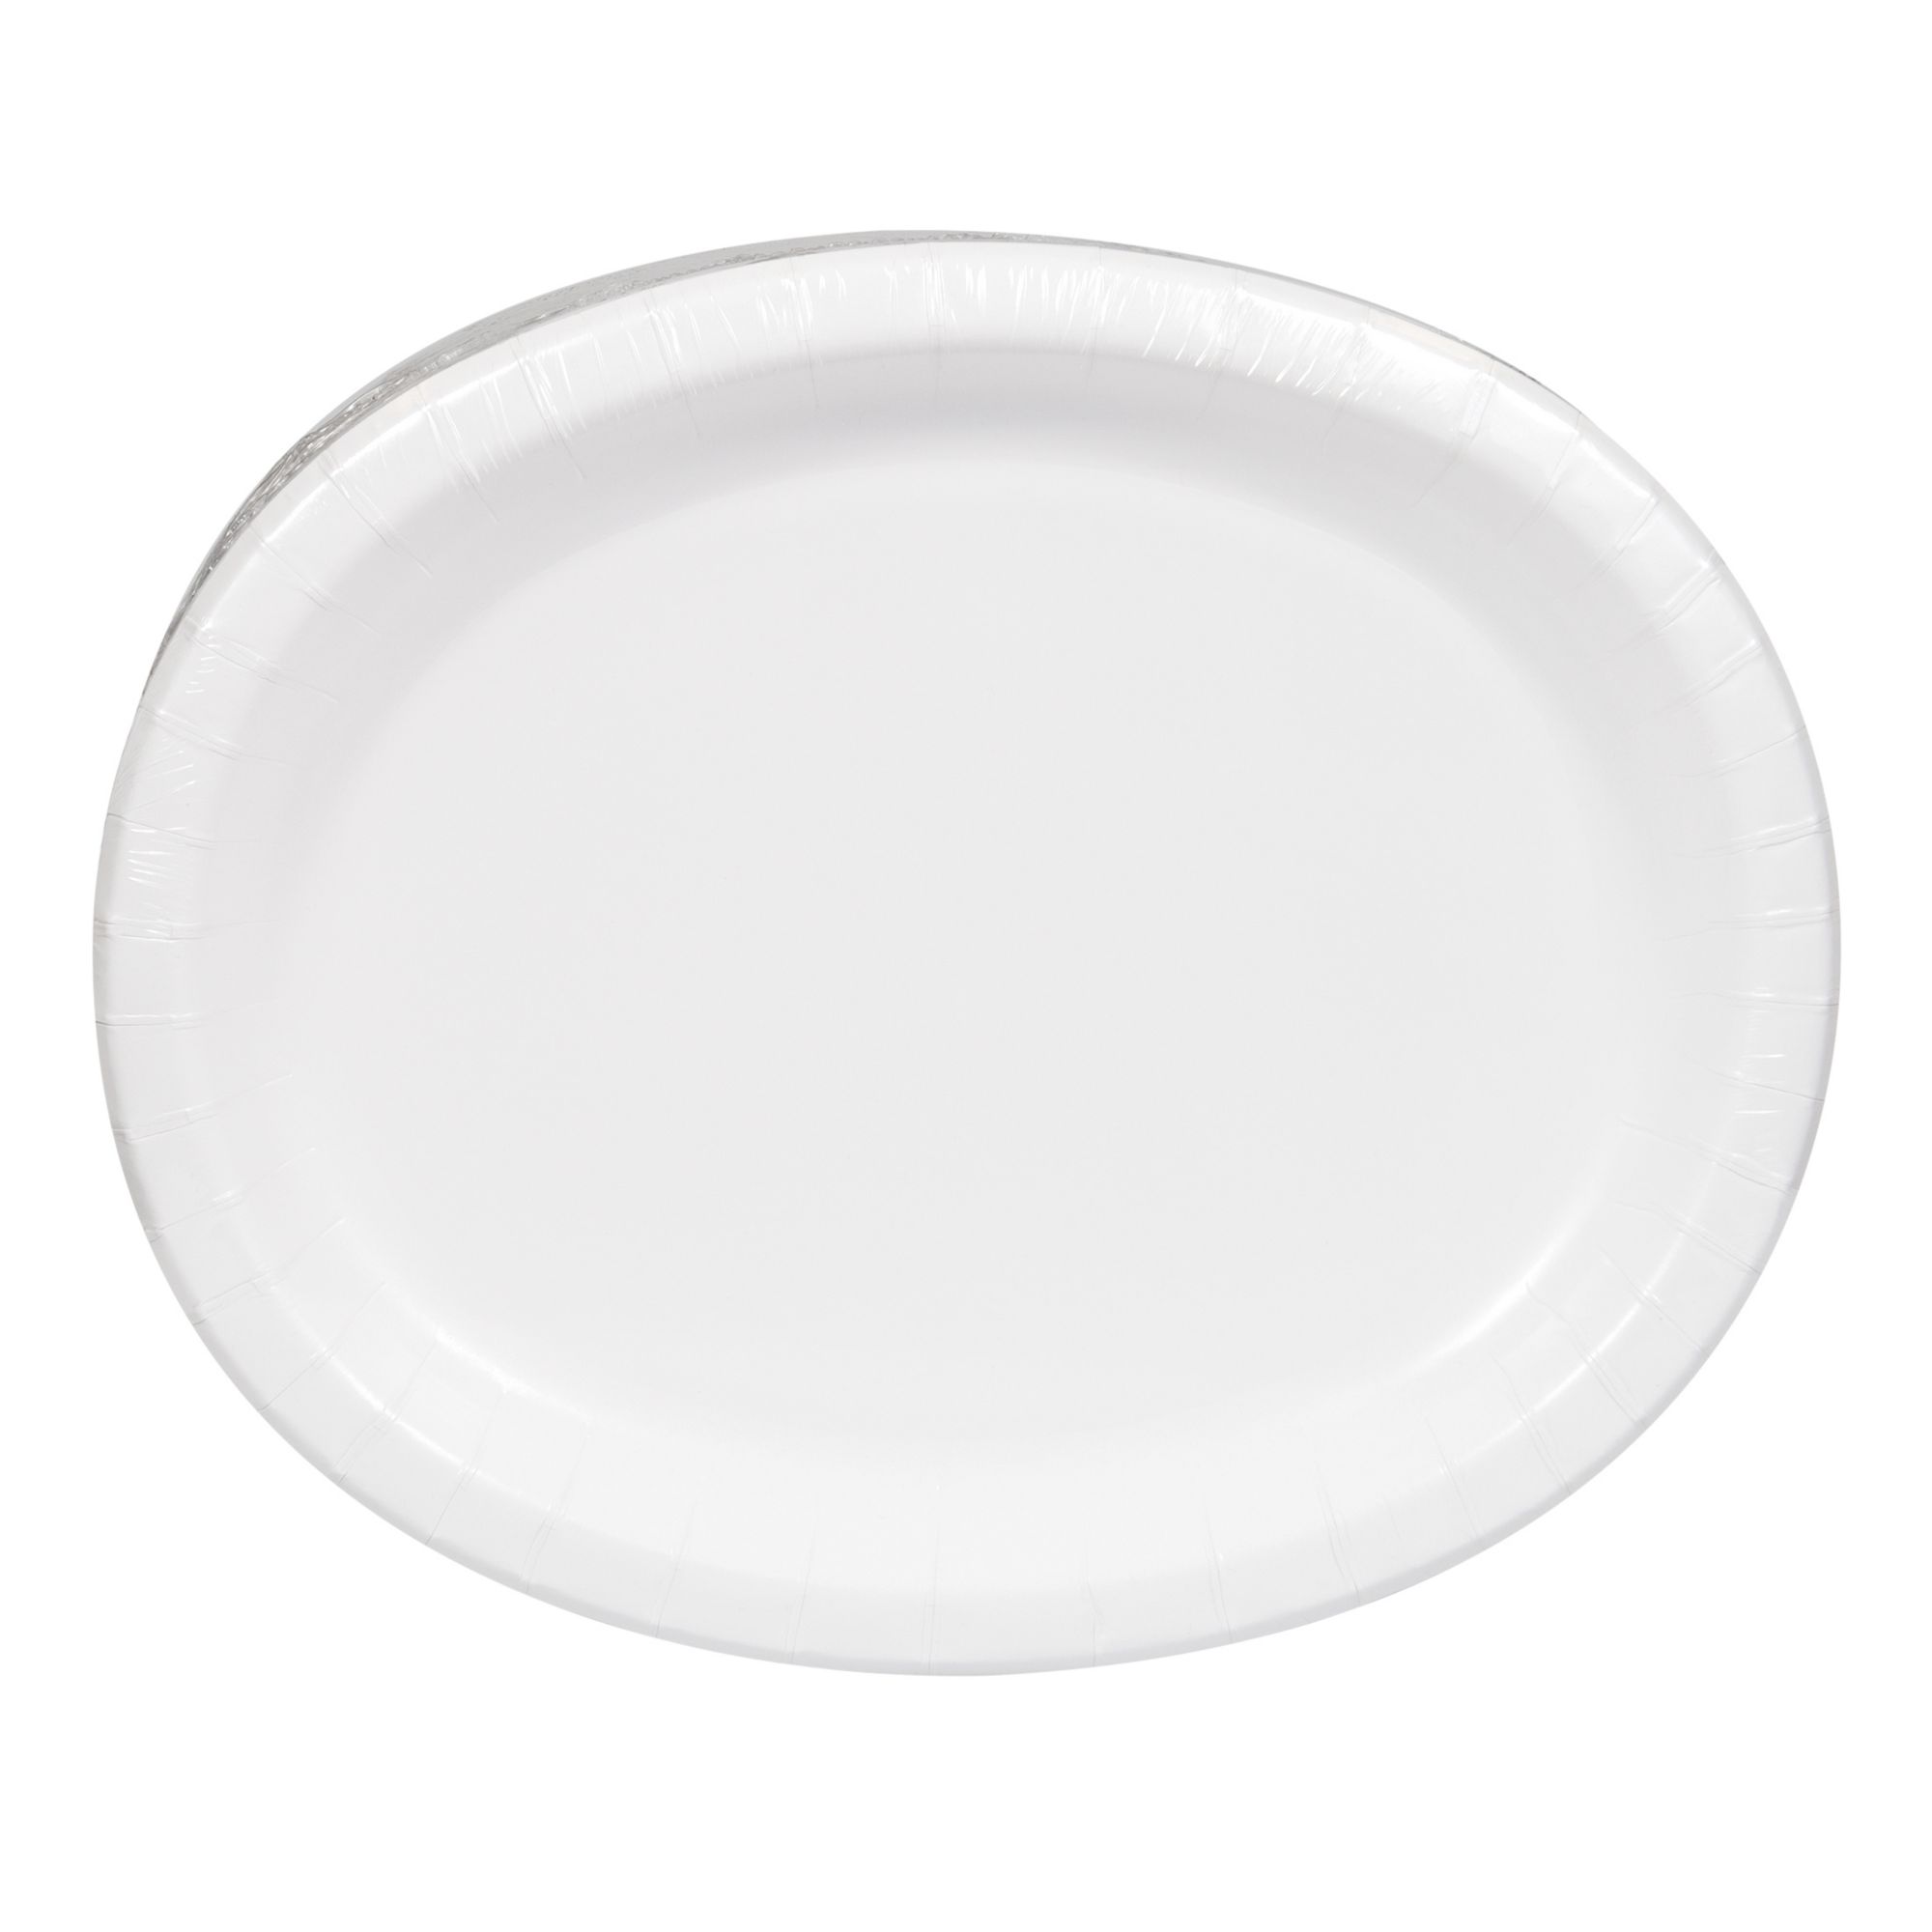 9 Paper Plates - 100 Count